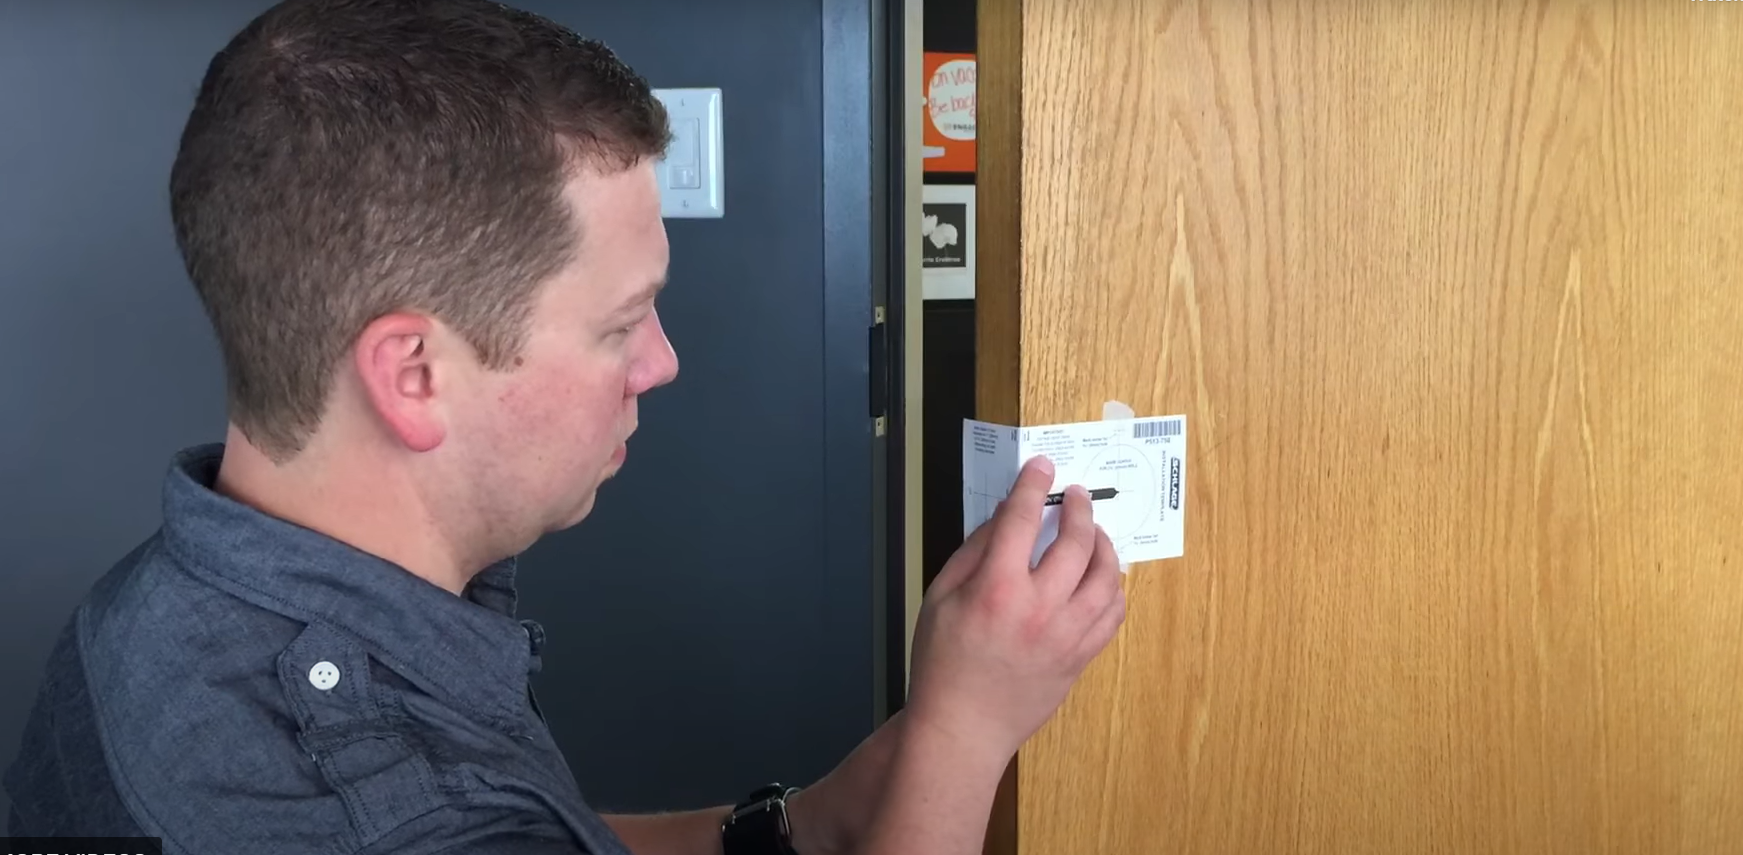 A man is seen from the side, focusing on installing or inspecting an electronic access control keypad next to a wooden door.